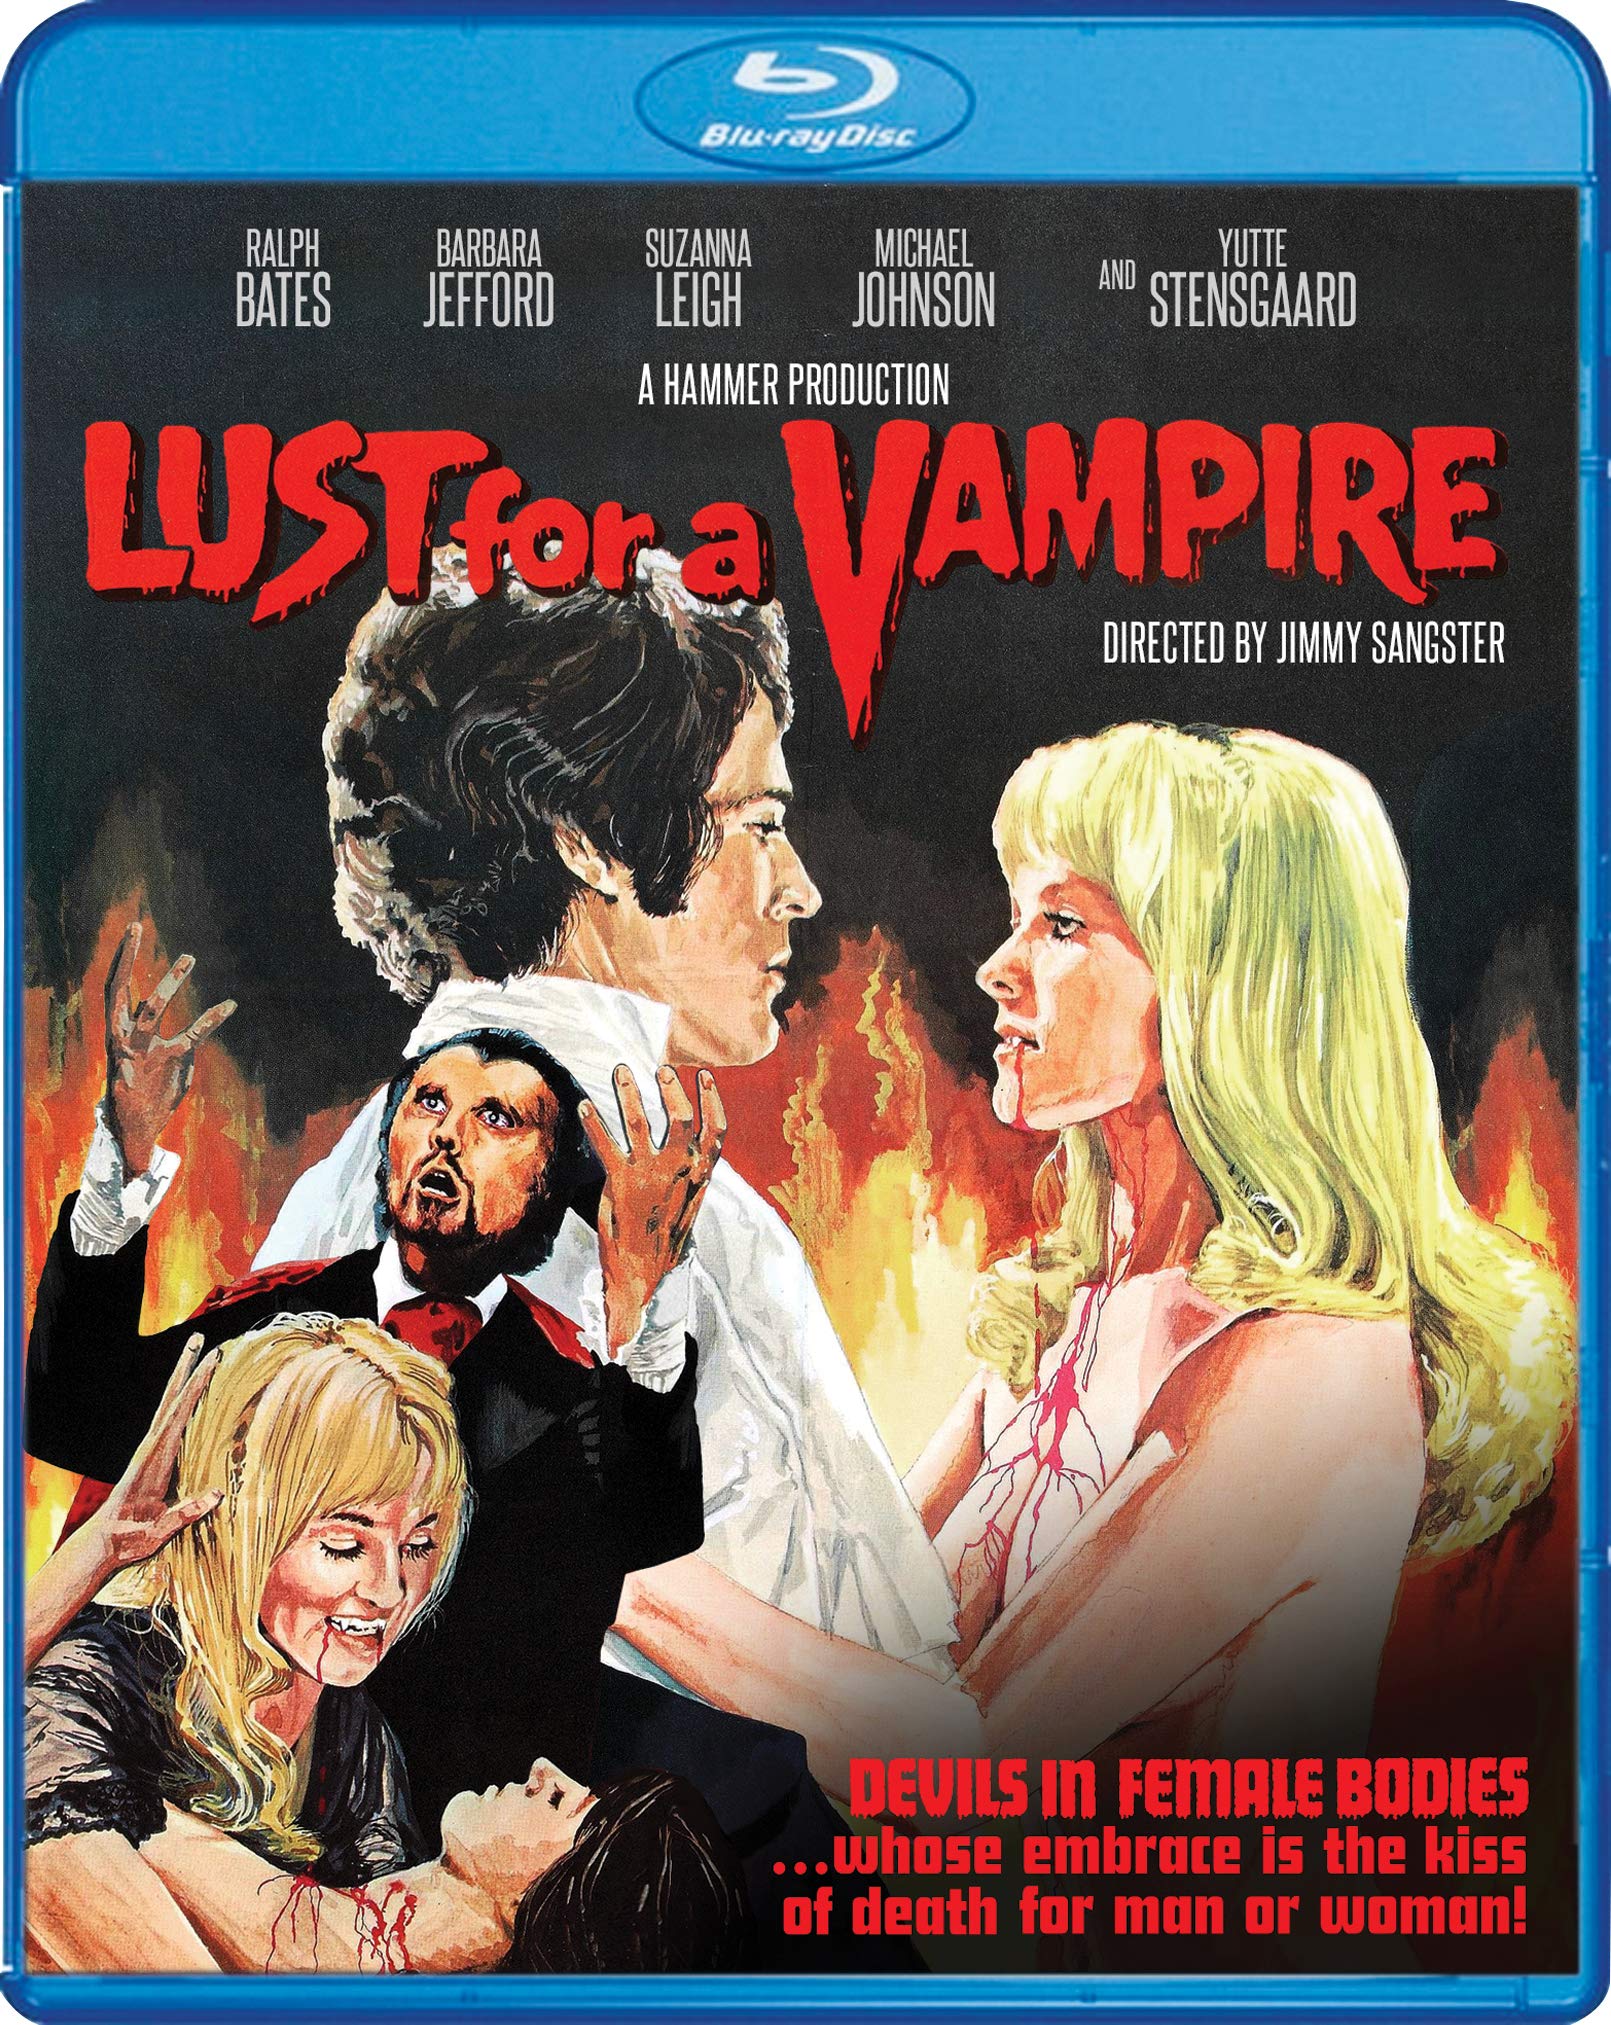 lust for a vampire blu-ray